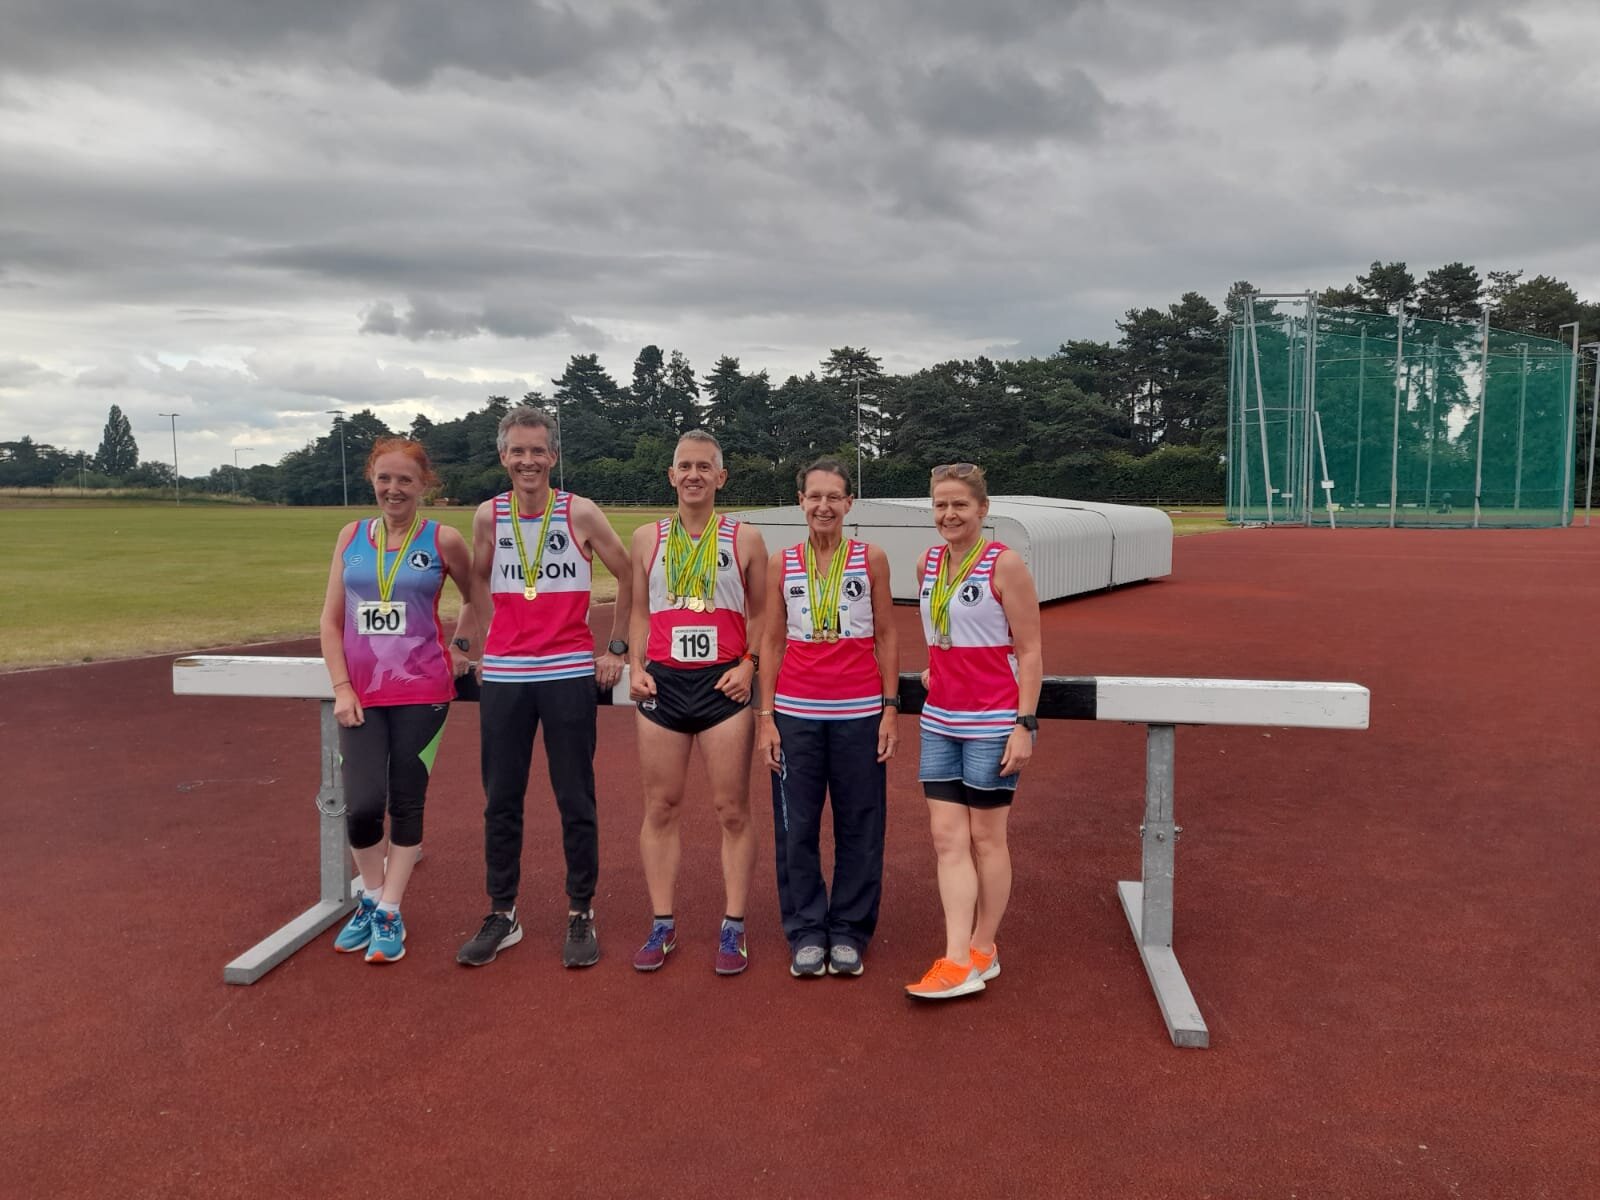 Worcestershire county track and field championships - 31th July 2021